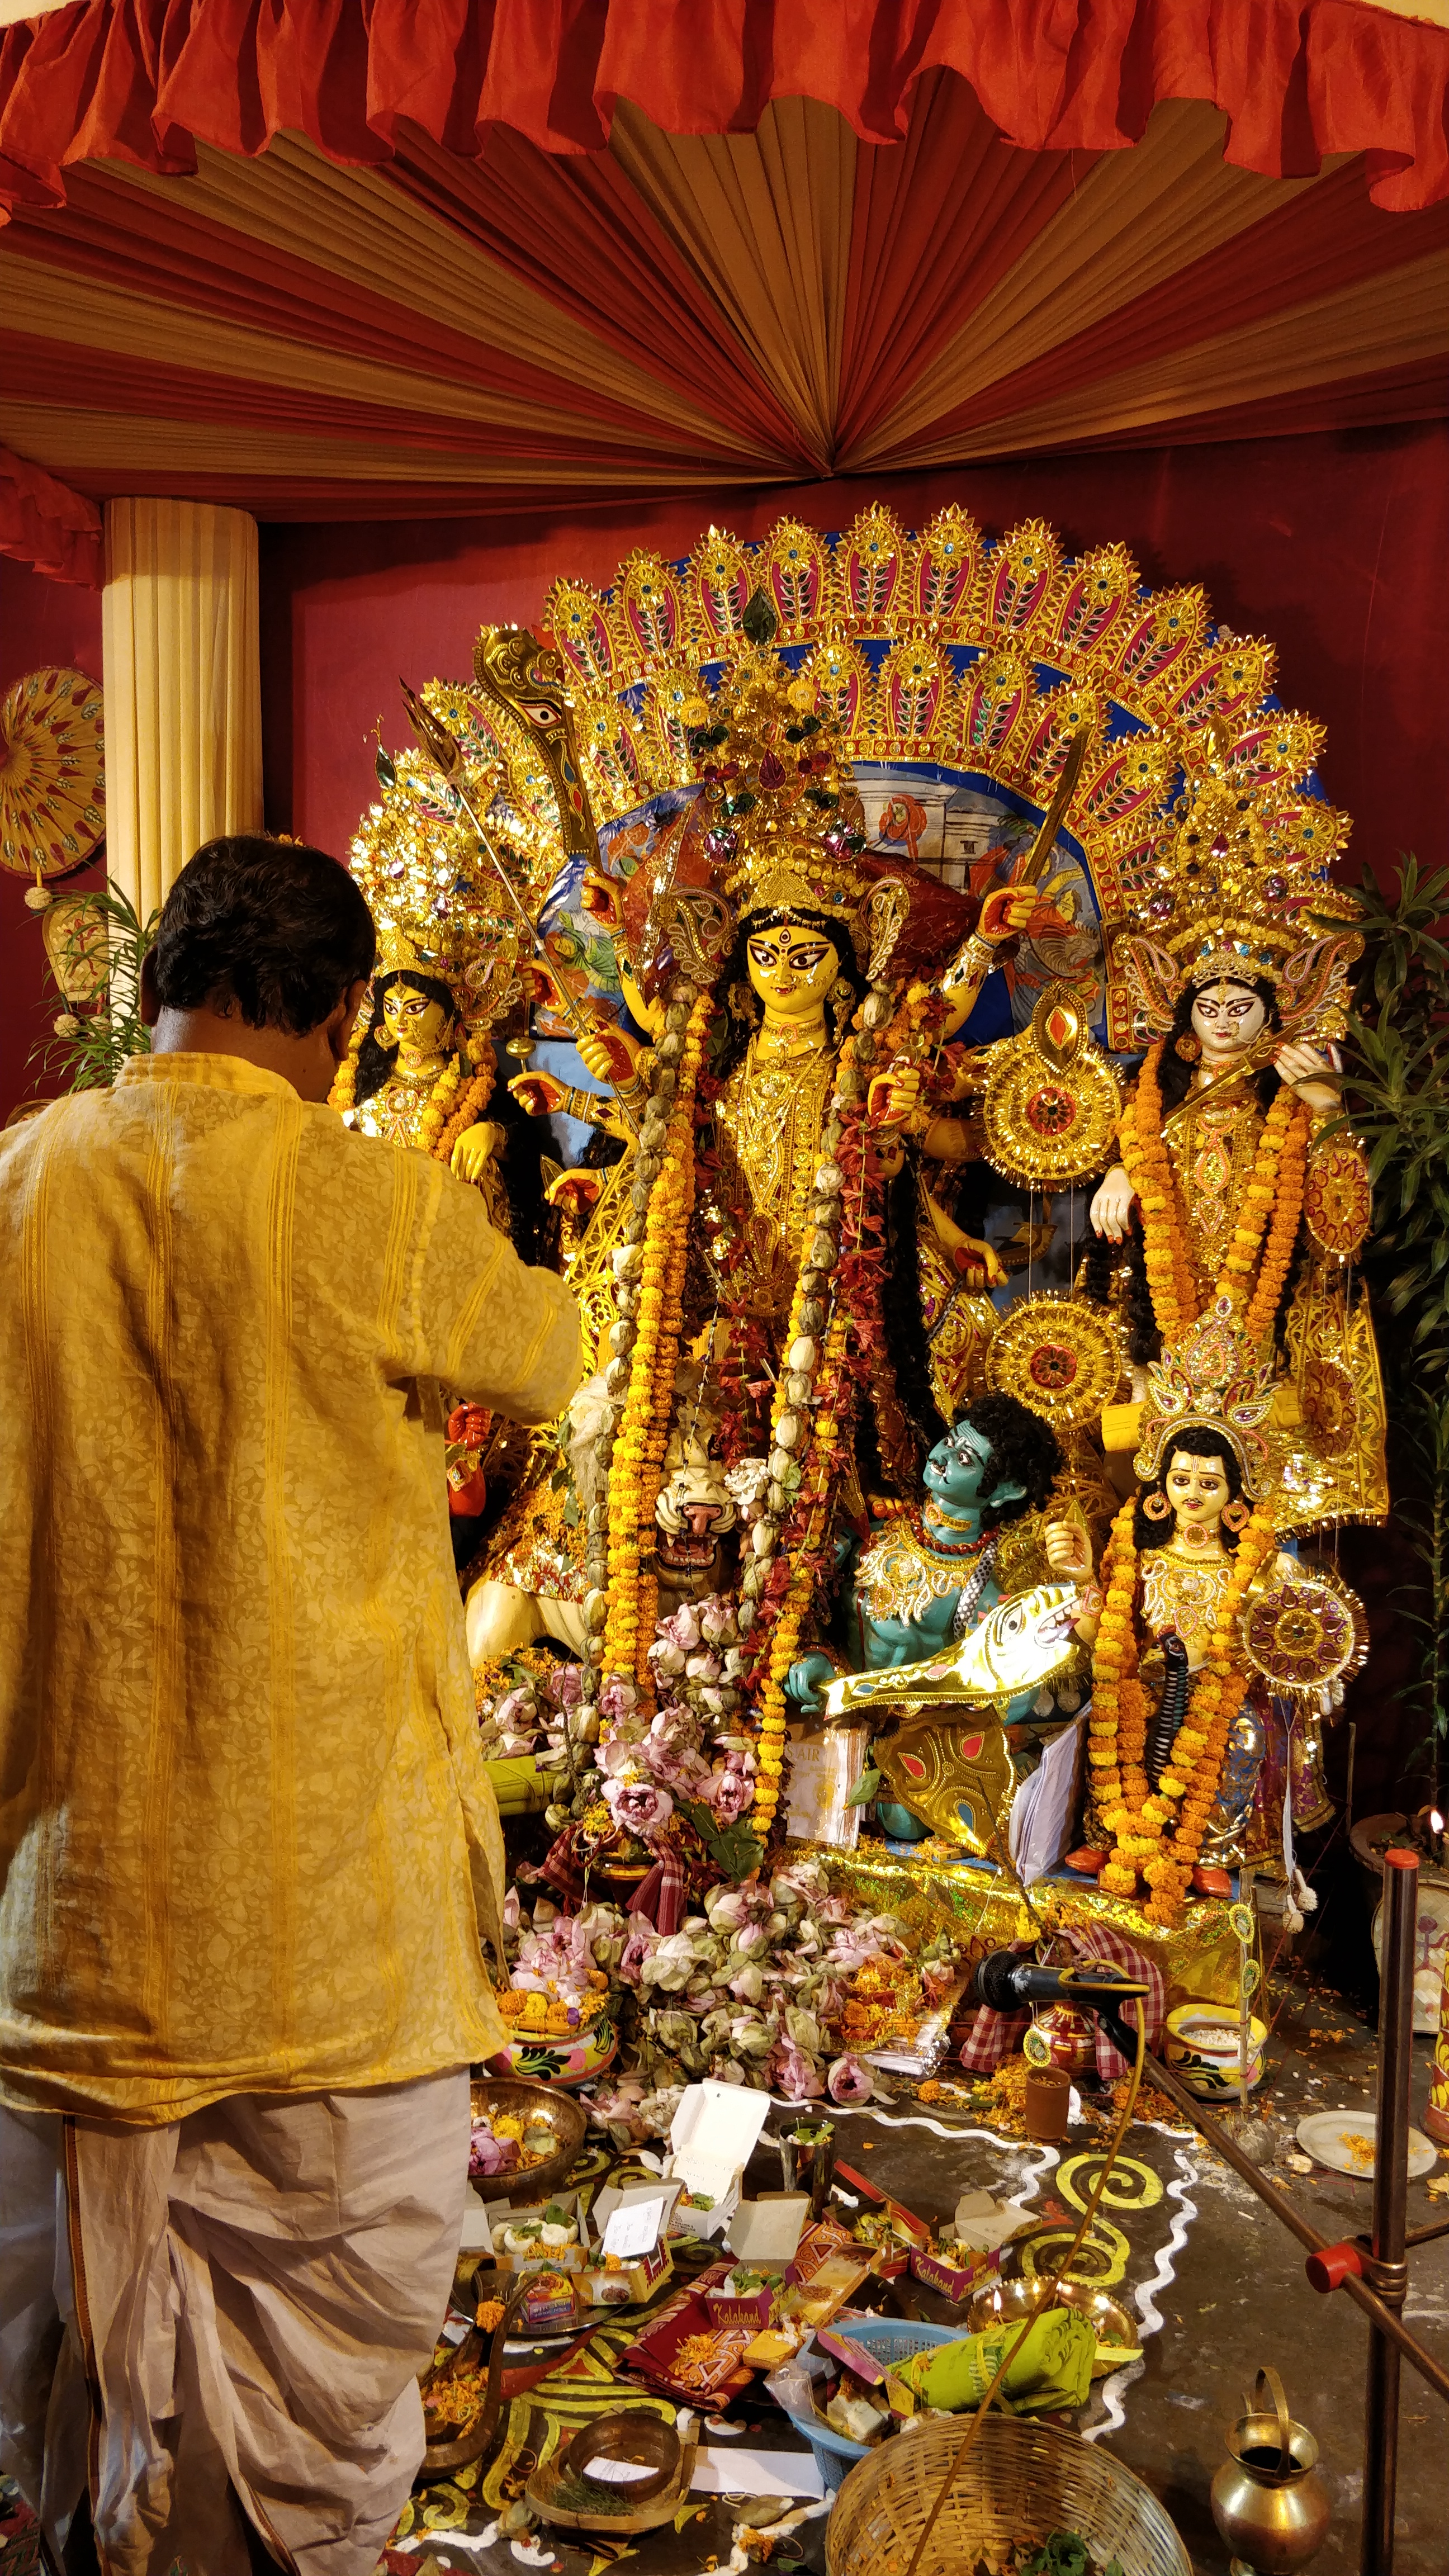 Communities conduct their own smaller pujos. Here, lotus flowers and offerings are placed at Durga's feet